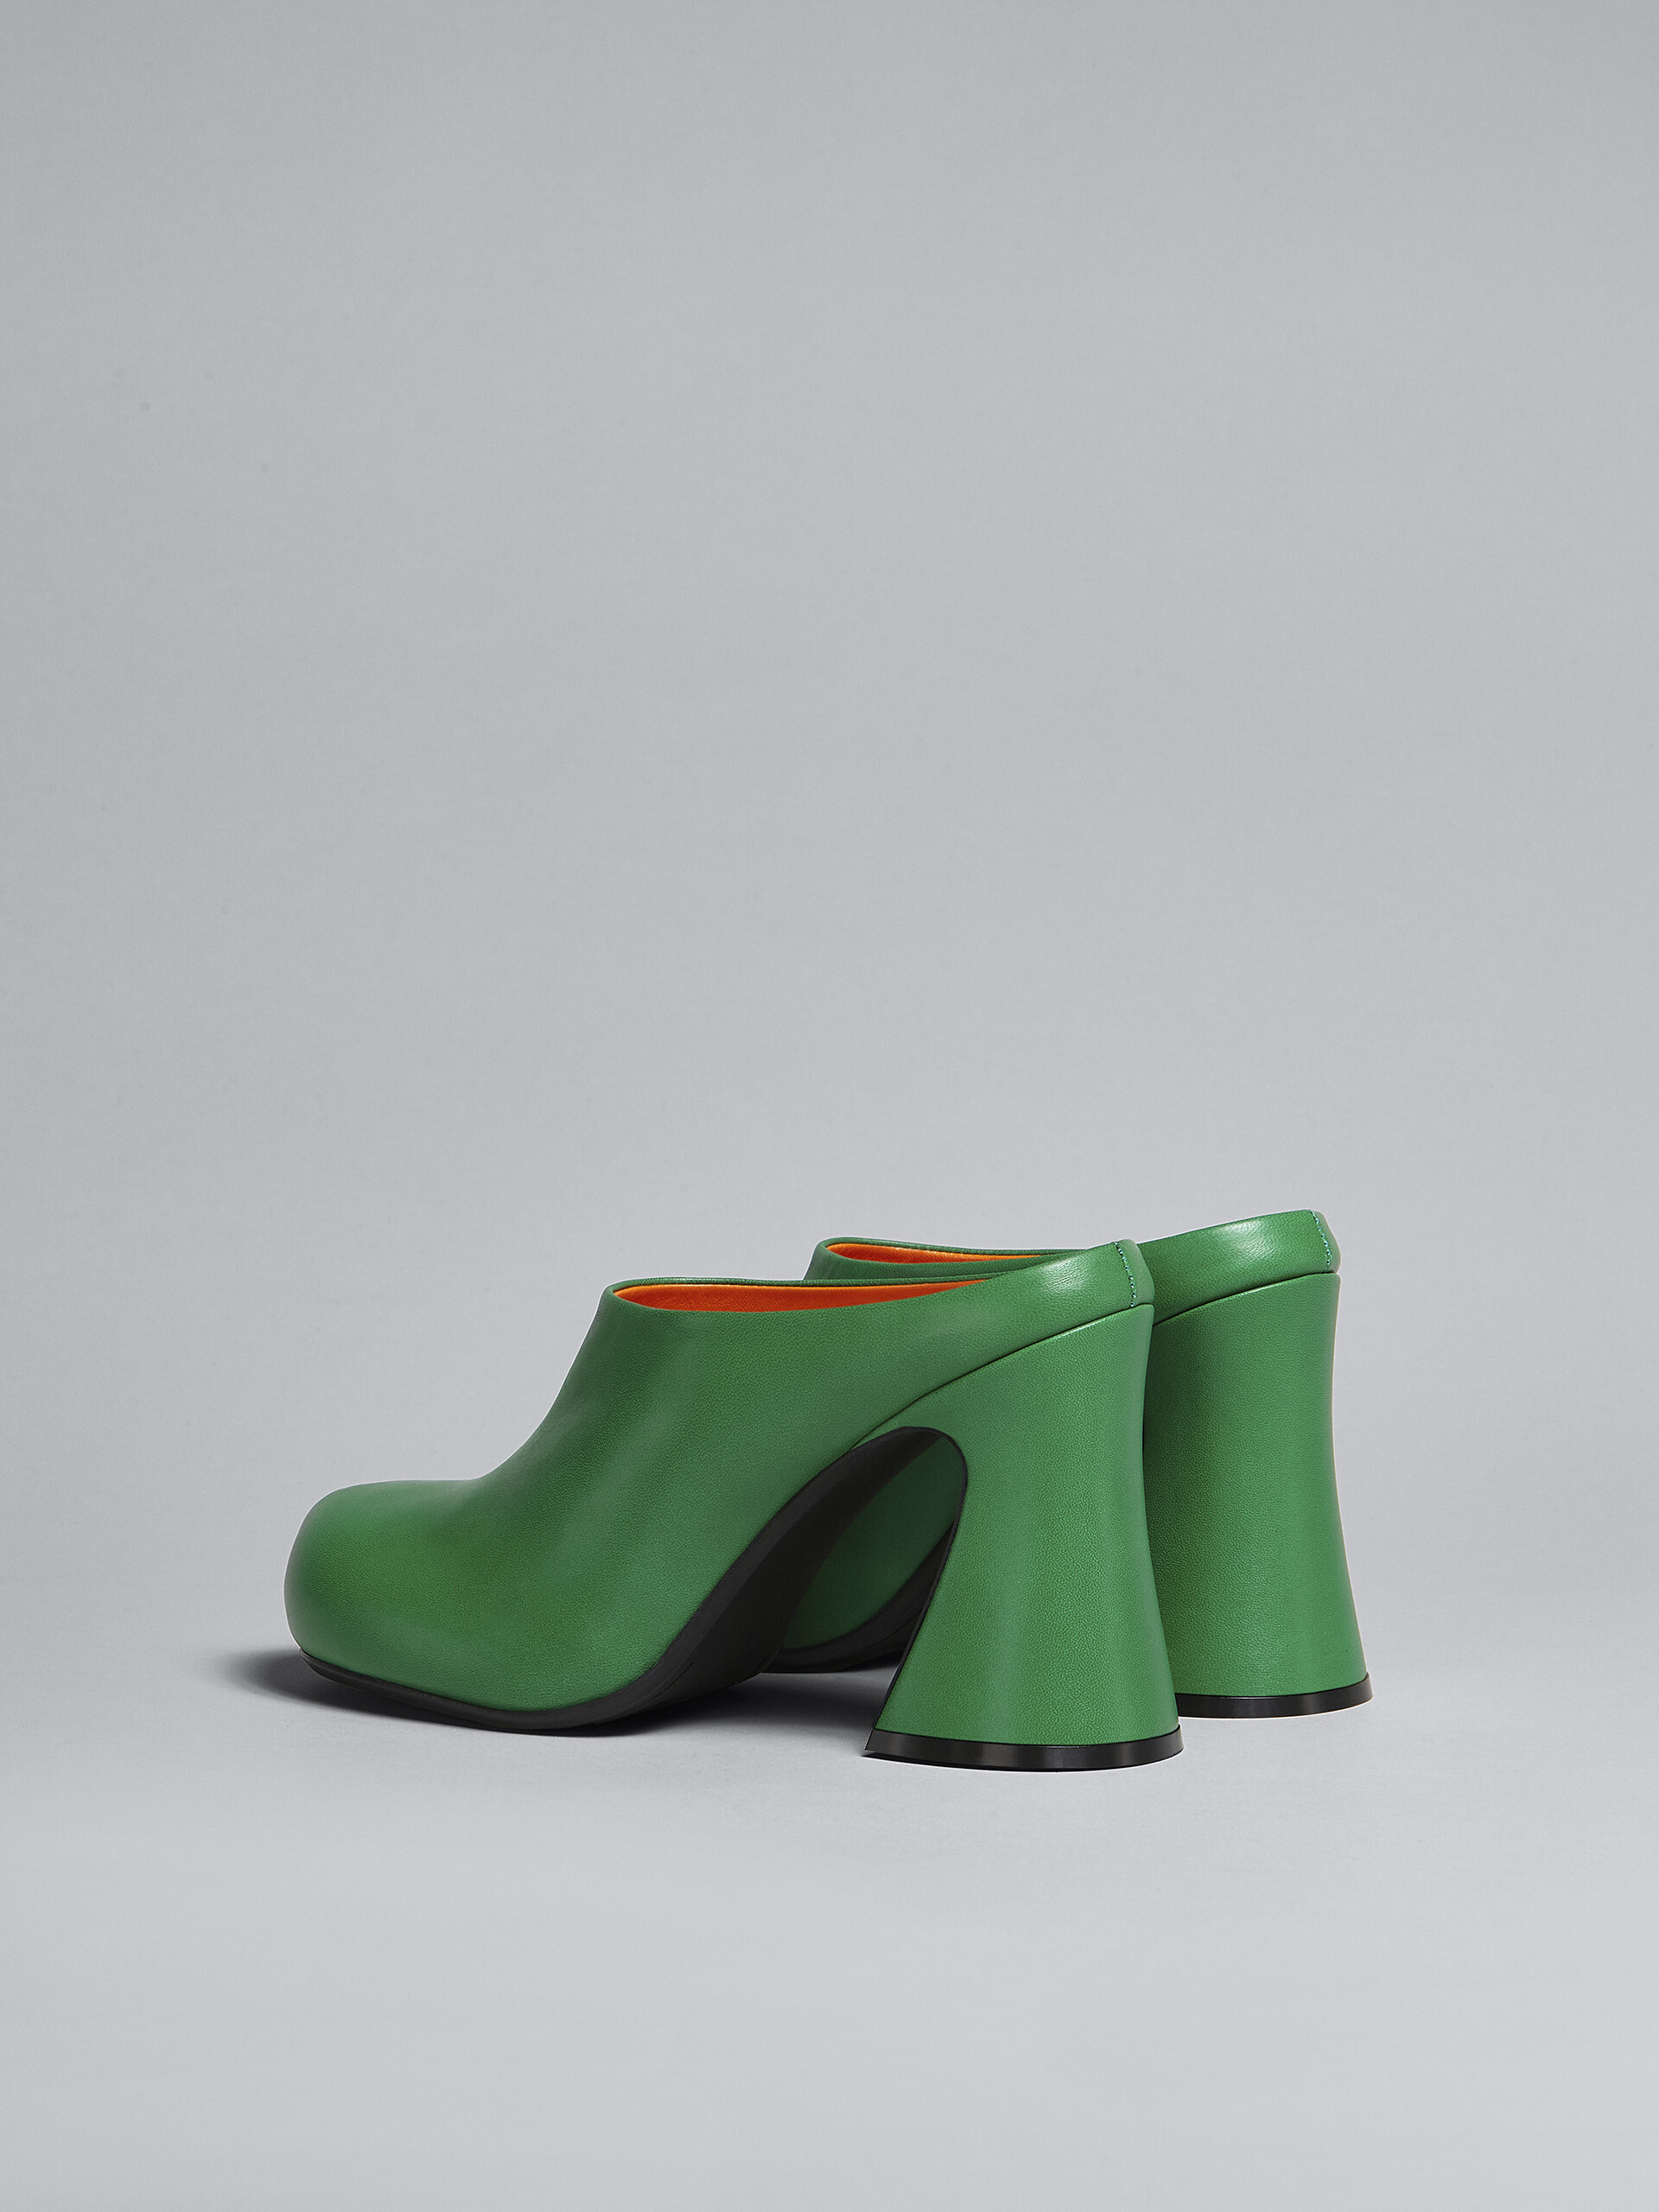 Green leather sabot - Clogs - Image 3